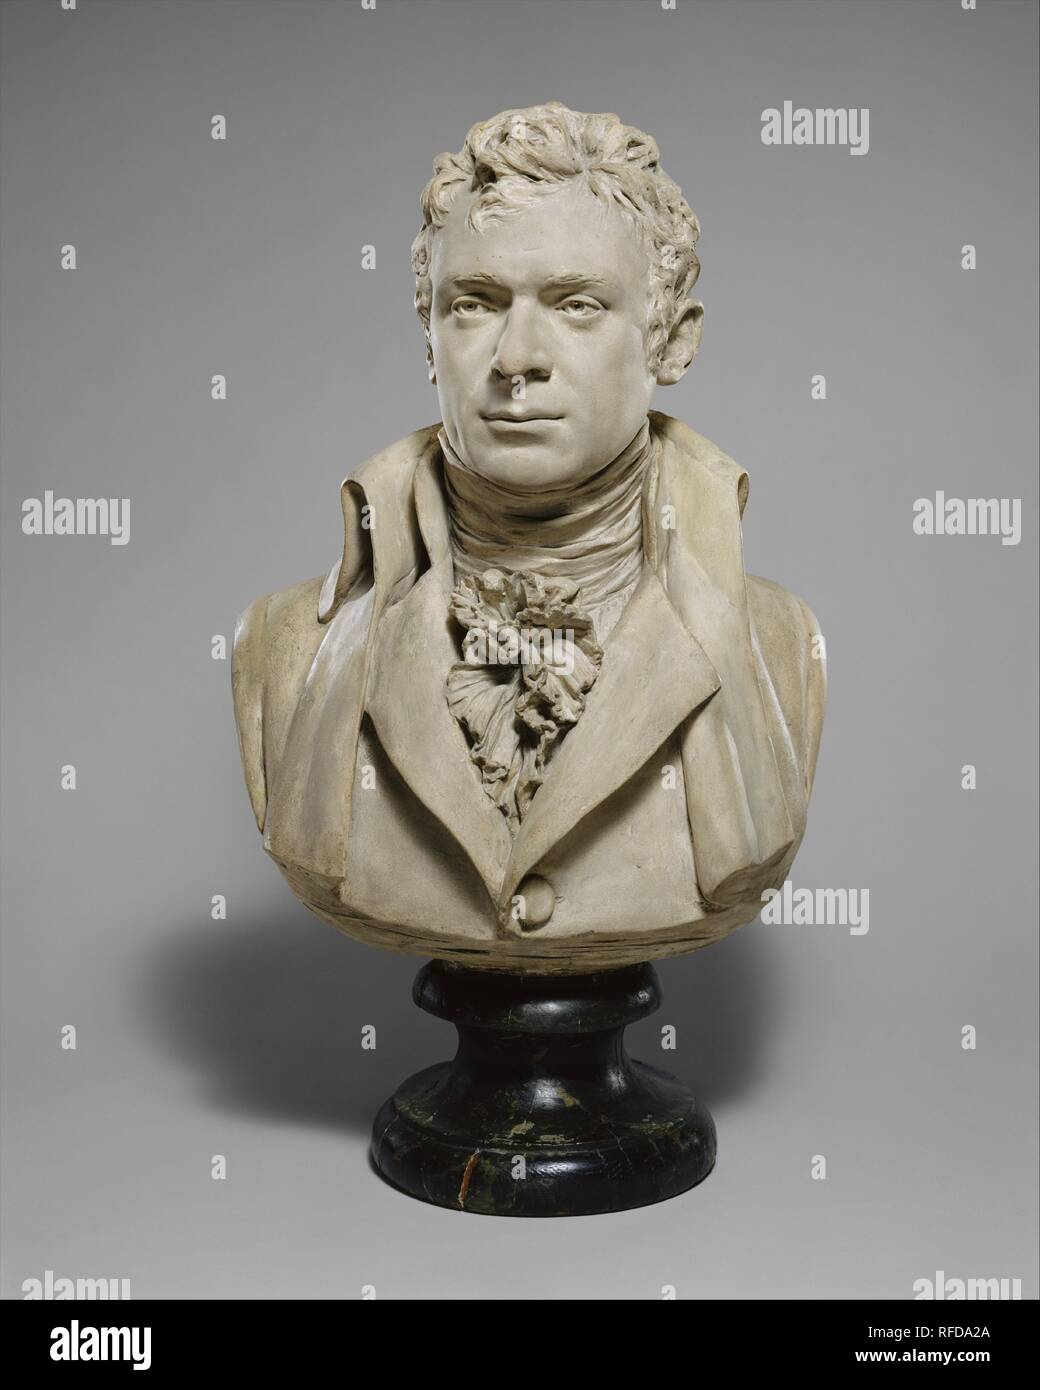 Robert Fulton (1765-1815). Artist: Jean Antoine Houdon (French, Versailles 1741-1828 Paris). Culture: French, Paris. Dimensions: Overall, incl. socle (approx. field measurement): 27 1/2 x 15 x 13 1/4 x 27 in. (68.6 x 38.1 x 33.7 cm); Ht. without socle: 21 1/2 in. (54.6 cm). Date: 1803-4.  This bust depicts one of the last of many Americans to be sculpted by Houdon, the French master portraitist whose earlier images of Washington, Jefferson, and Franklin are embedded in our national consciousness. A painter first and an inventor second, Fulton sat for Houdon while visiting Paris in a fruitless  Stock Photo